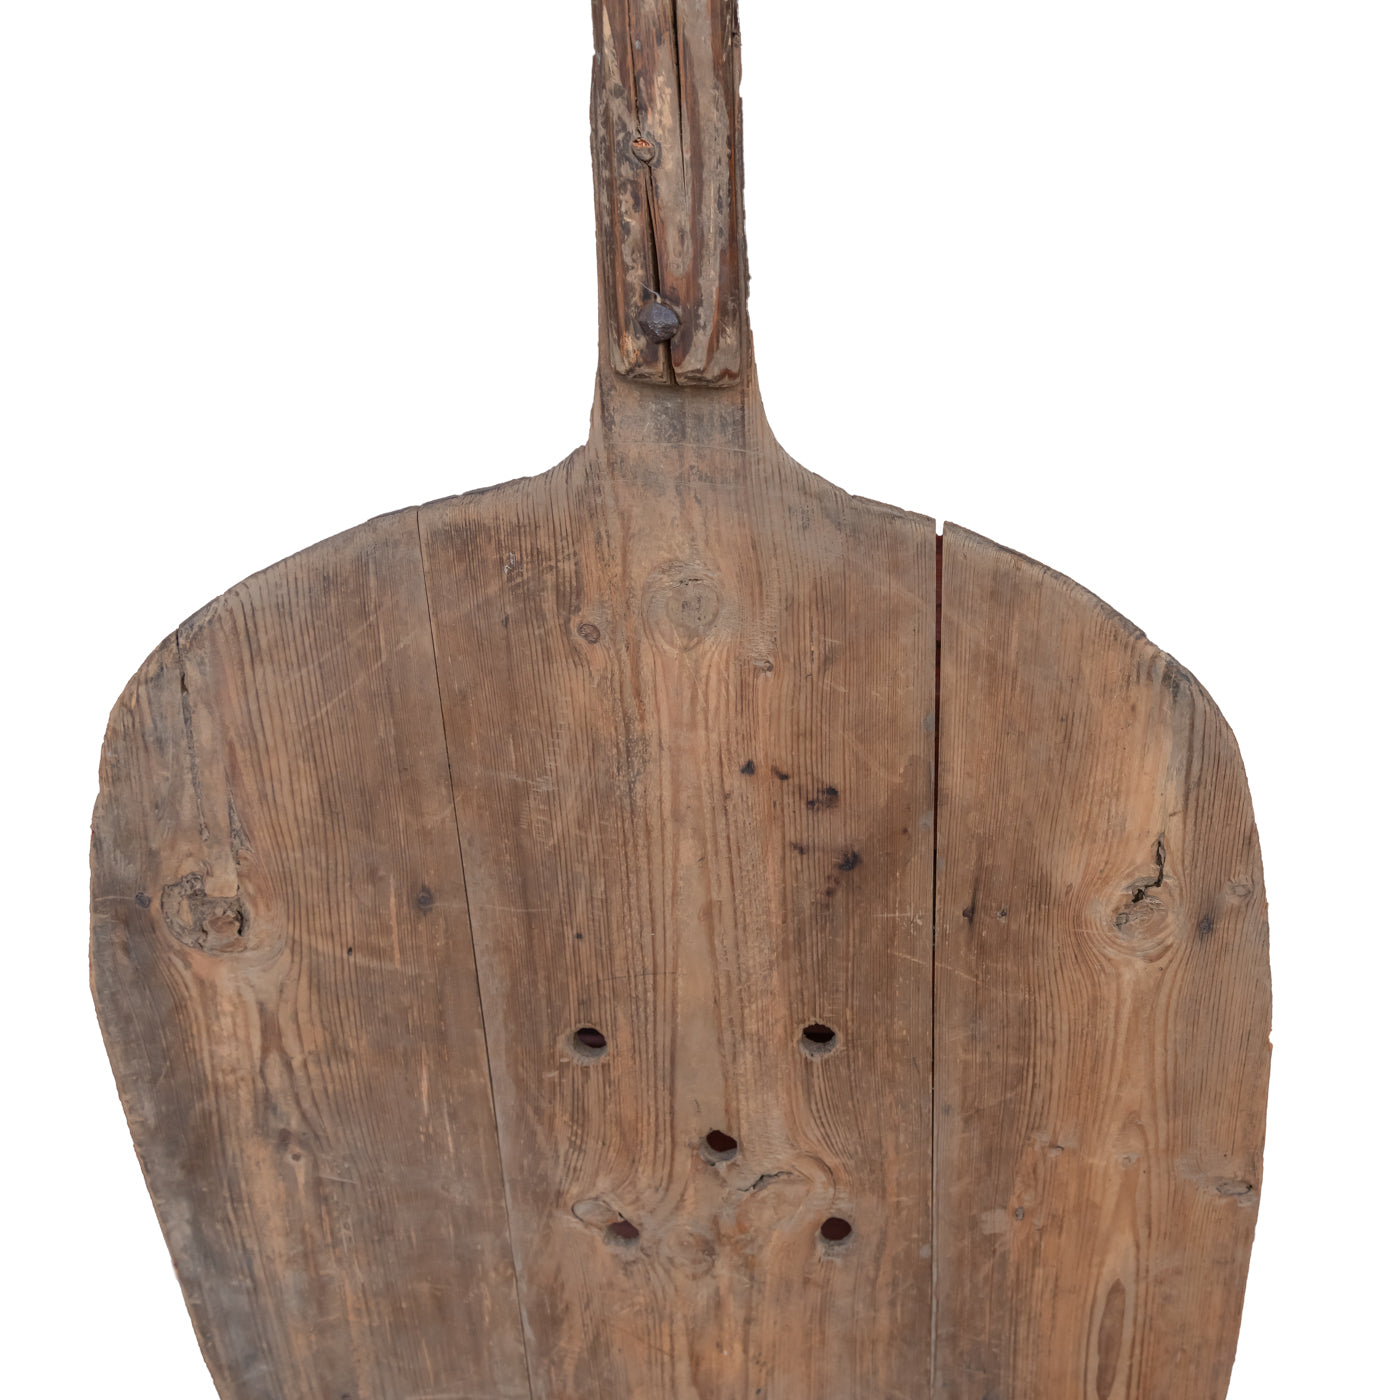 Bread shovel from late 1700